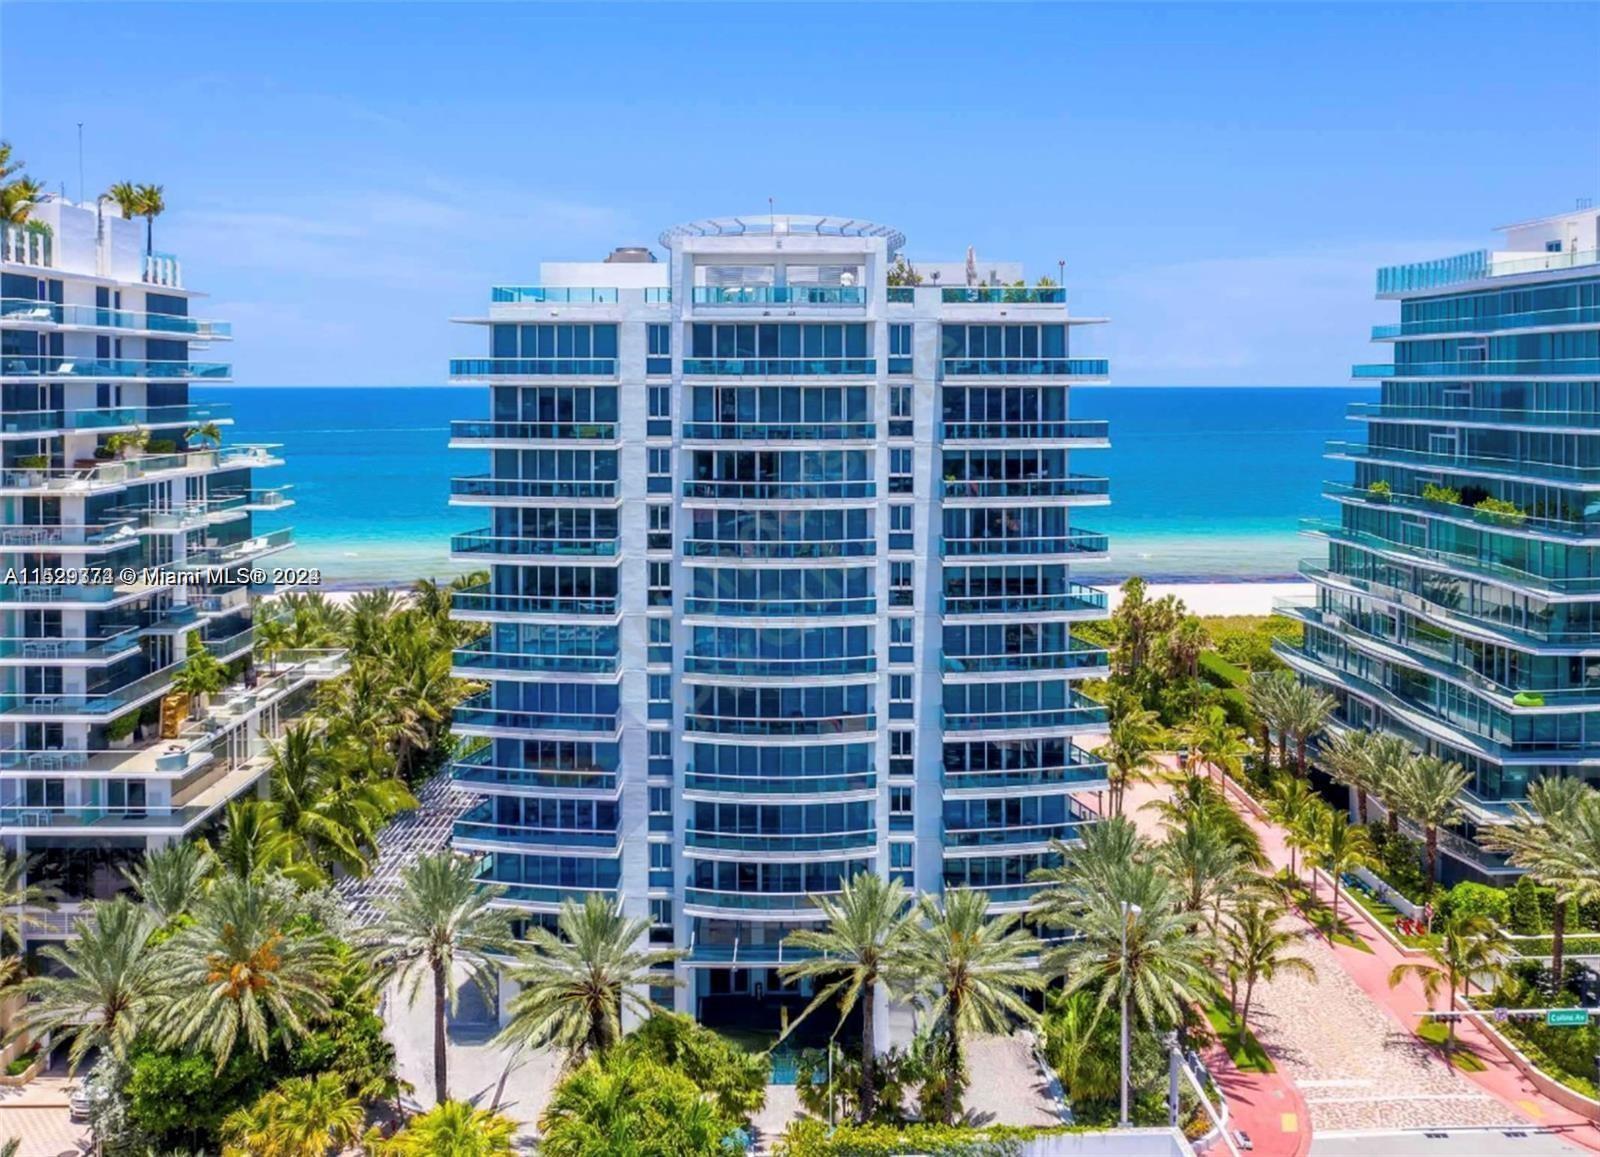 *AVAILABLE BEGINNING 5/19/24* THE BEST MODERN BOUTIQUE LUXURY OCEANFRONT CONDO IN SURFSIDE IS AZURE. ONE OF THE FEW BUILDINGS WITH DAILY BEACH SERVICE. LOCATED 1 BLOCK TO PUBLIX, 2 BLOCKS TO BAL HARBOUR SHOPS, HOUSES OF WORSHIP, ETC. AZURE 603 IS A LARGE CORNER UNIT W/ WRAP-AROUND BALCONY, FLOOR-TO-CEILING IMPACT WINDOWS + DOORS. MORE CLOSET SPACE THAN MOST CONDOS YOU’LL FIND IN THE NEIGHBORHOOD. ALL 3 BEDROOMS HAVE WINDOWS AND TV. PRIMARY BATHROOM FEATURES DOUBLE SINK, JACUZZI BATHTUB AND SHOWER. KITCHEN FEATURES TOP-OF-THE-LINE APPLIANCES AND GRANITE COUNTERTOPS. AZURE OFFERS A HEATED POOL W/ OUTDOOR JACUZZI, TOP-OF-THE-LINE FITNESS CENTER W/ CARDIO TRAINING, FREE WIFI THROUGHOUT, FREE PARKING + VALET WITH 24/7 SECURITY. SHABBAT ELEVATOR INCLUDED! WATCH VIDEO IN VIRTUAL TOUR